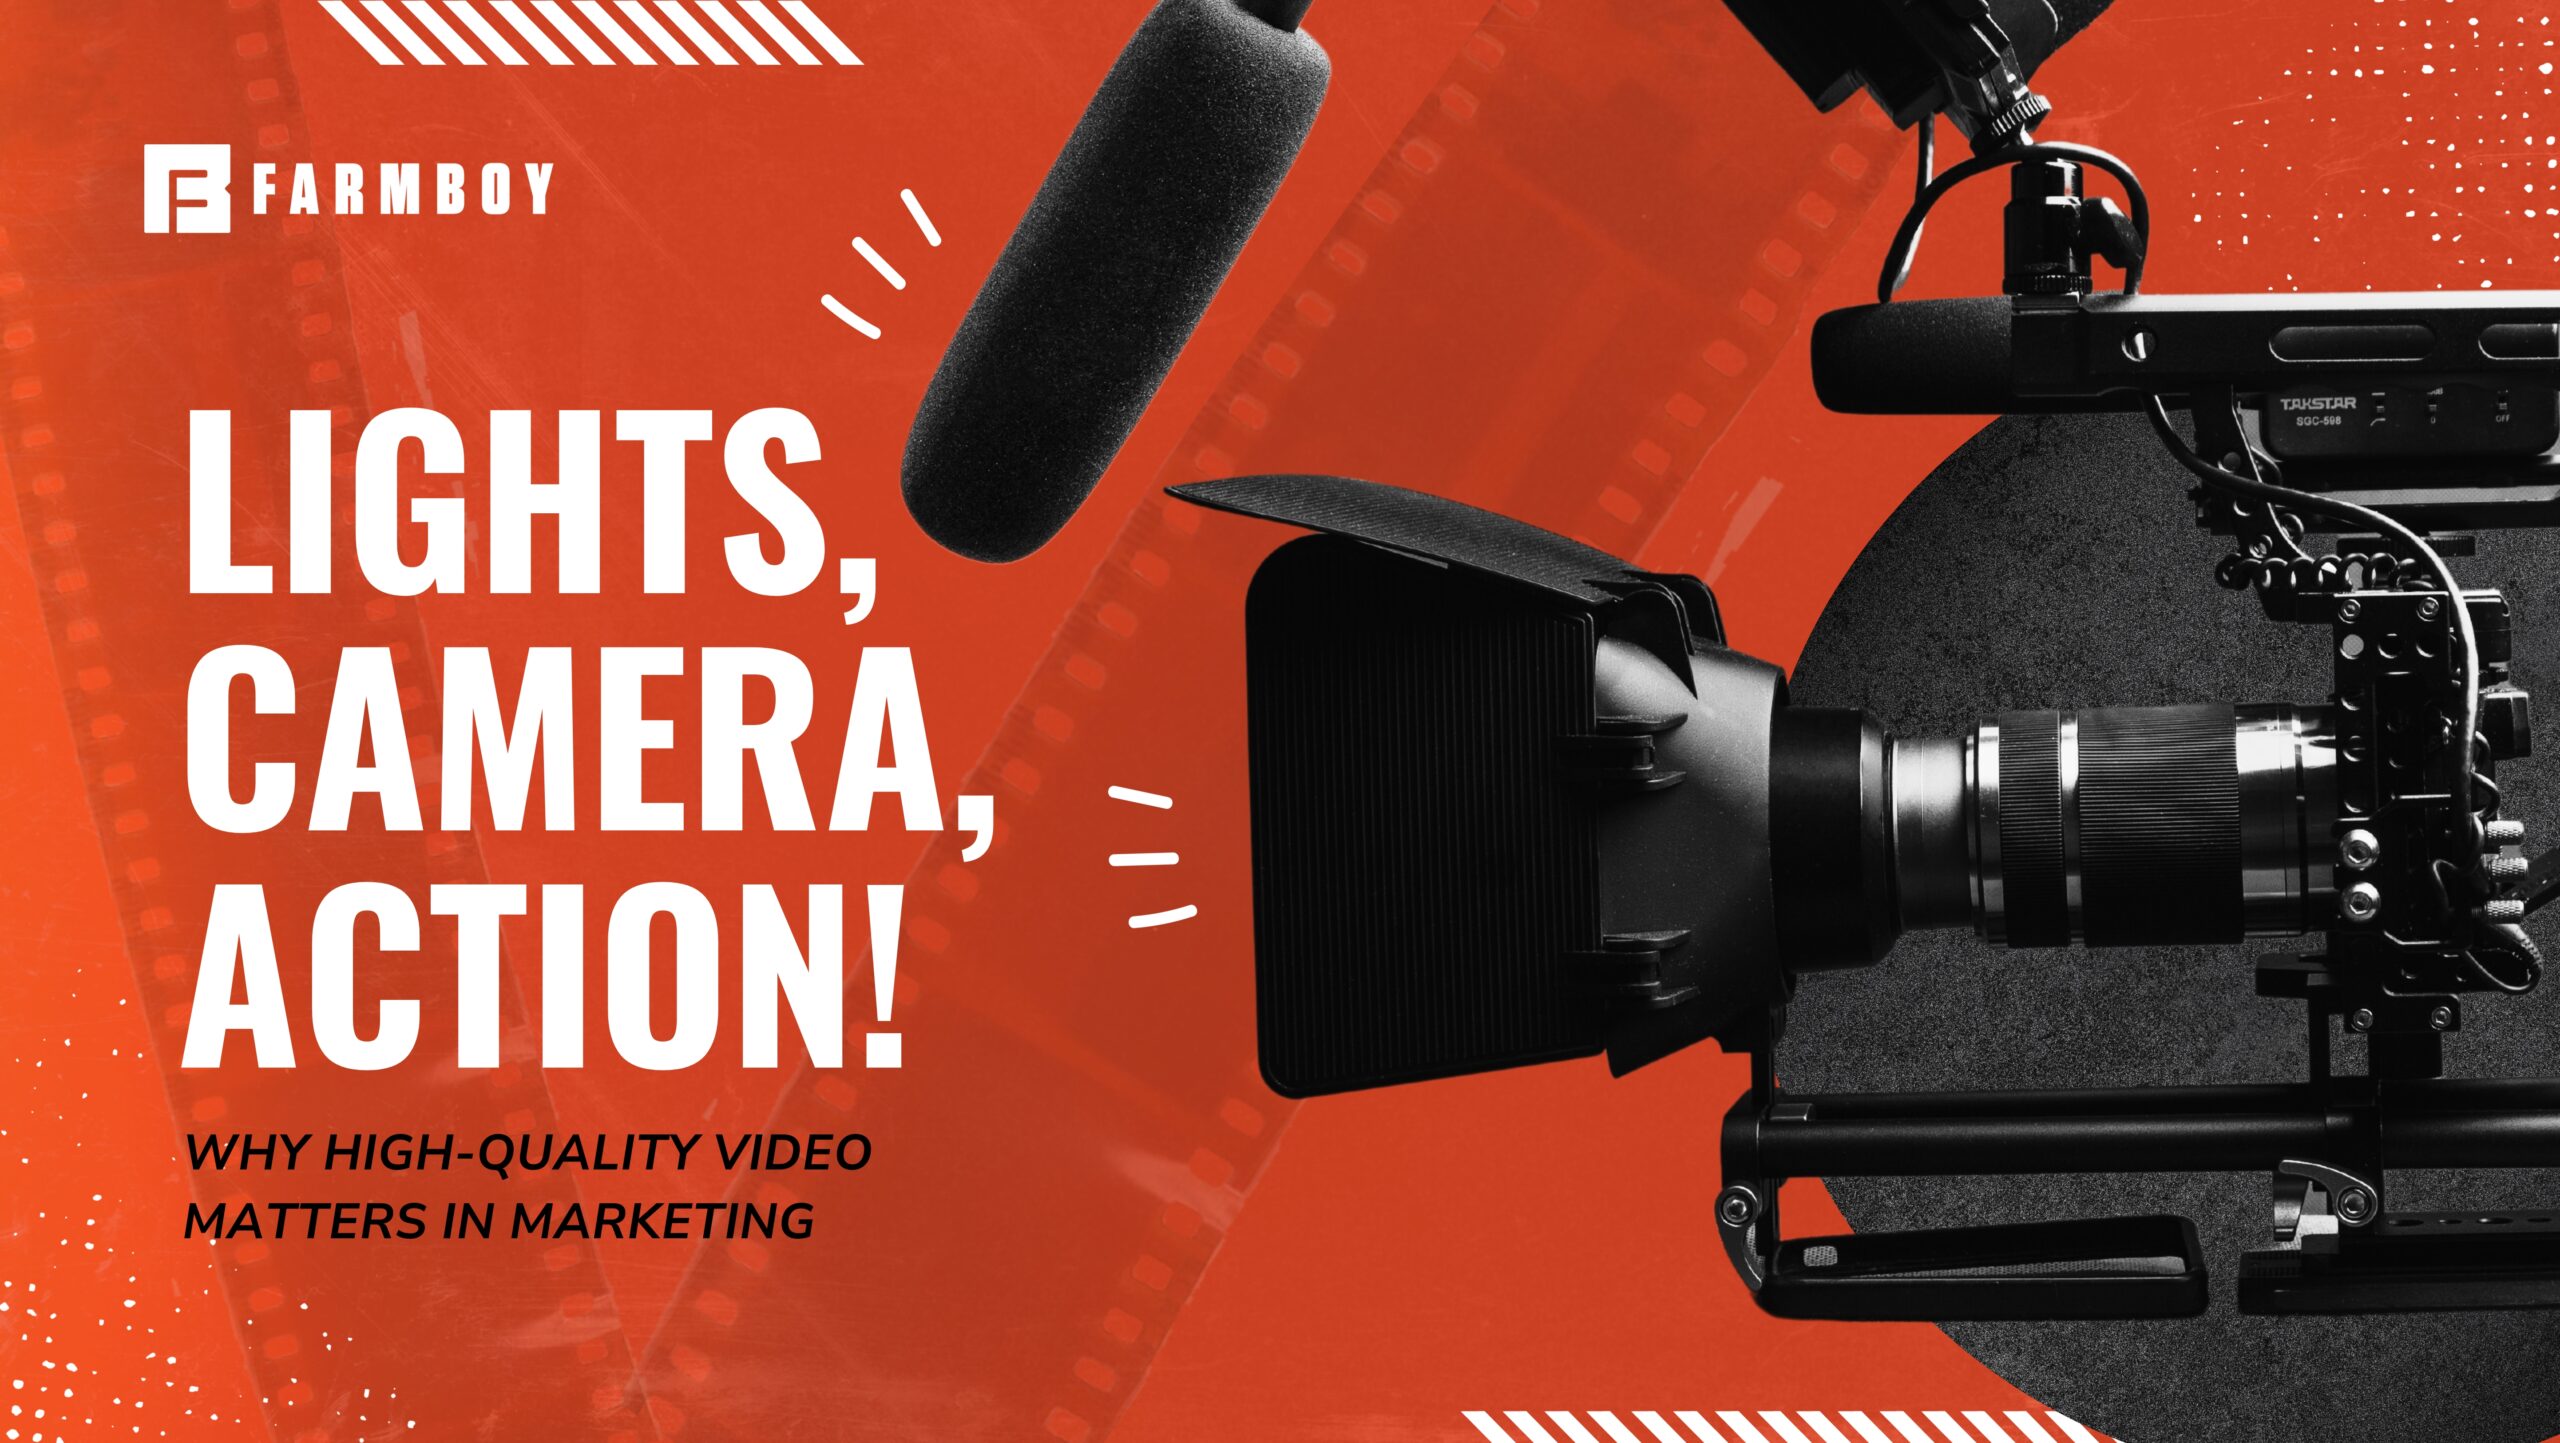 Cover image for blog "Lights, Camera, Action! Why High-Quality Video Matters in Marketing"